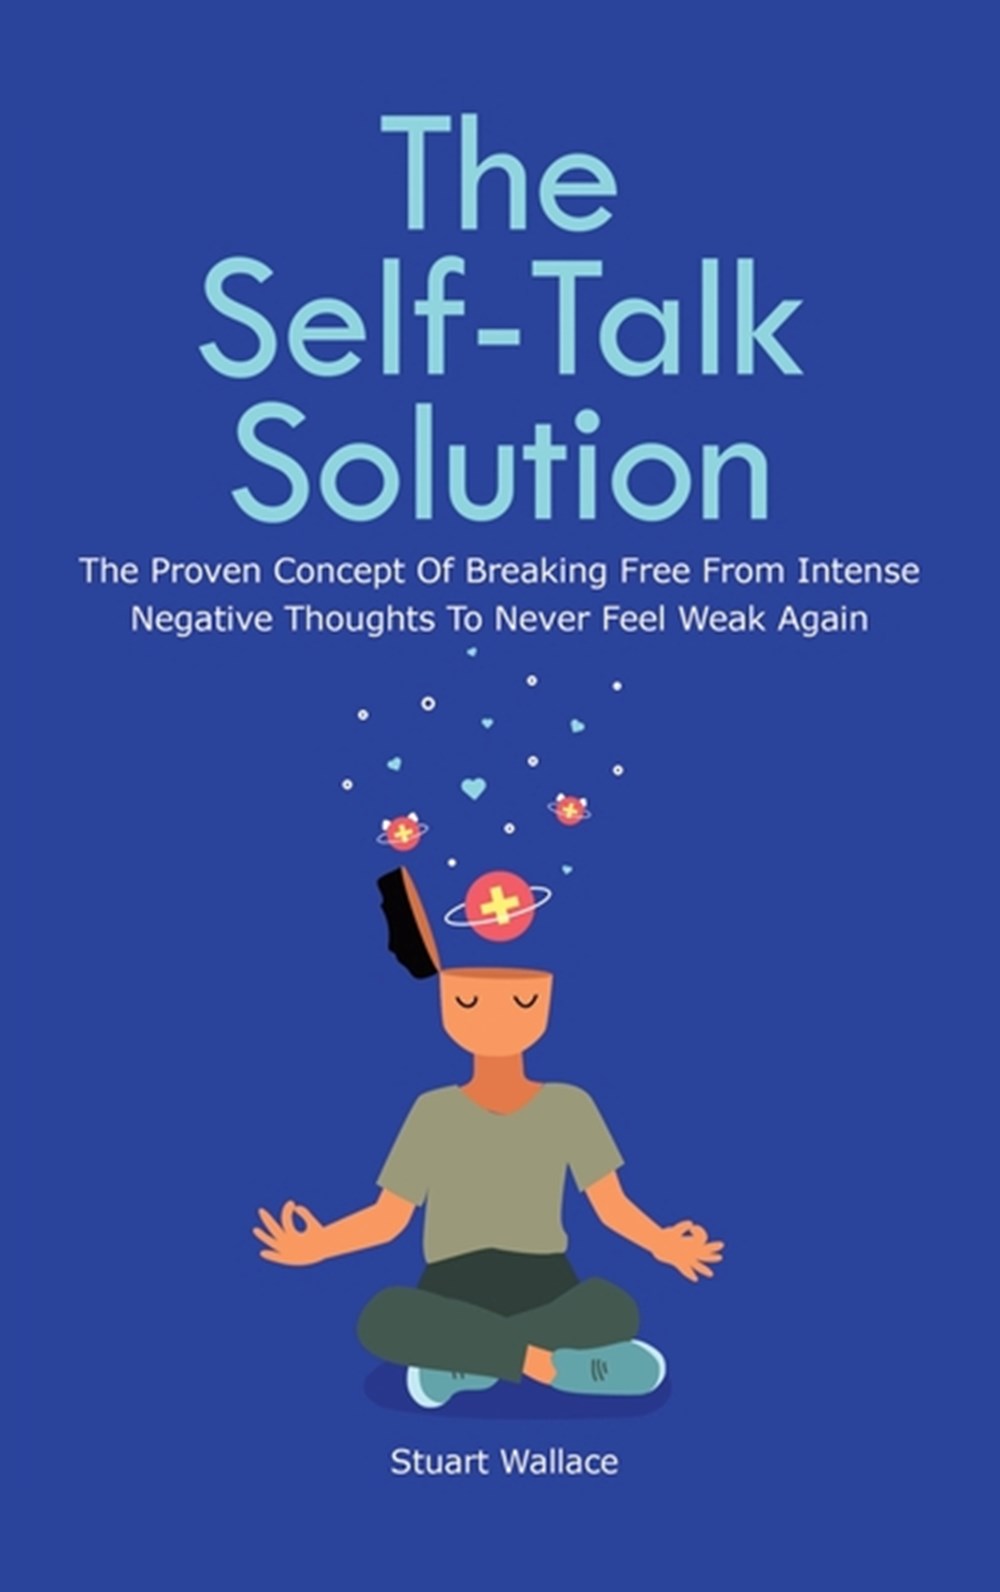 Self-Talk Solution: The Proven Concept Of Breaking Free From Intense Negative Thoughts To Never Feel